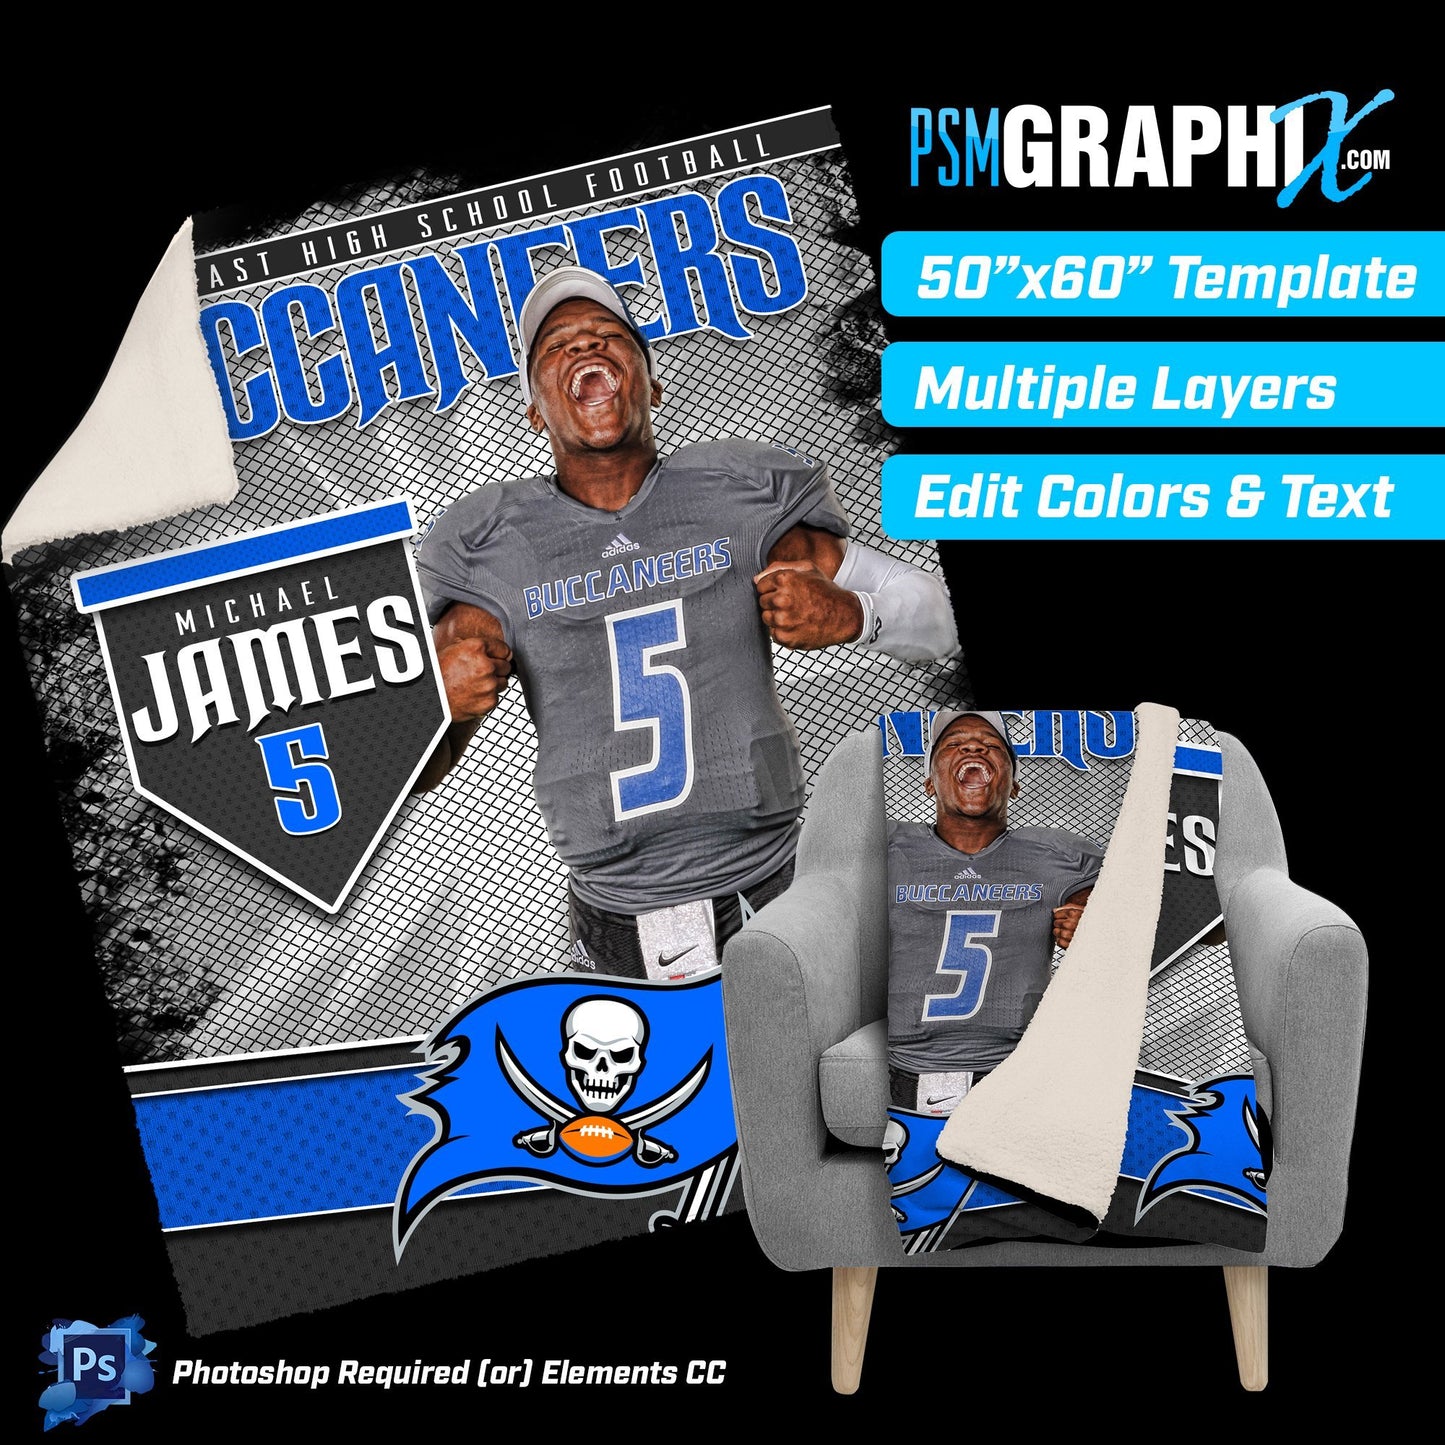 V4 - Grill - 50"x60" Blanket Template-Photoshop Template - PSMGraphix